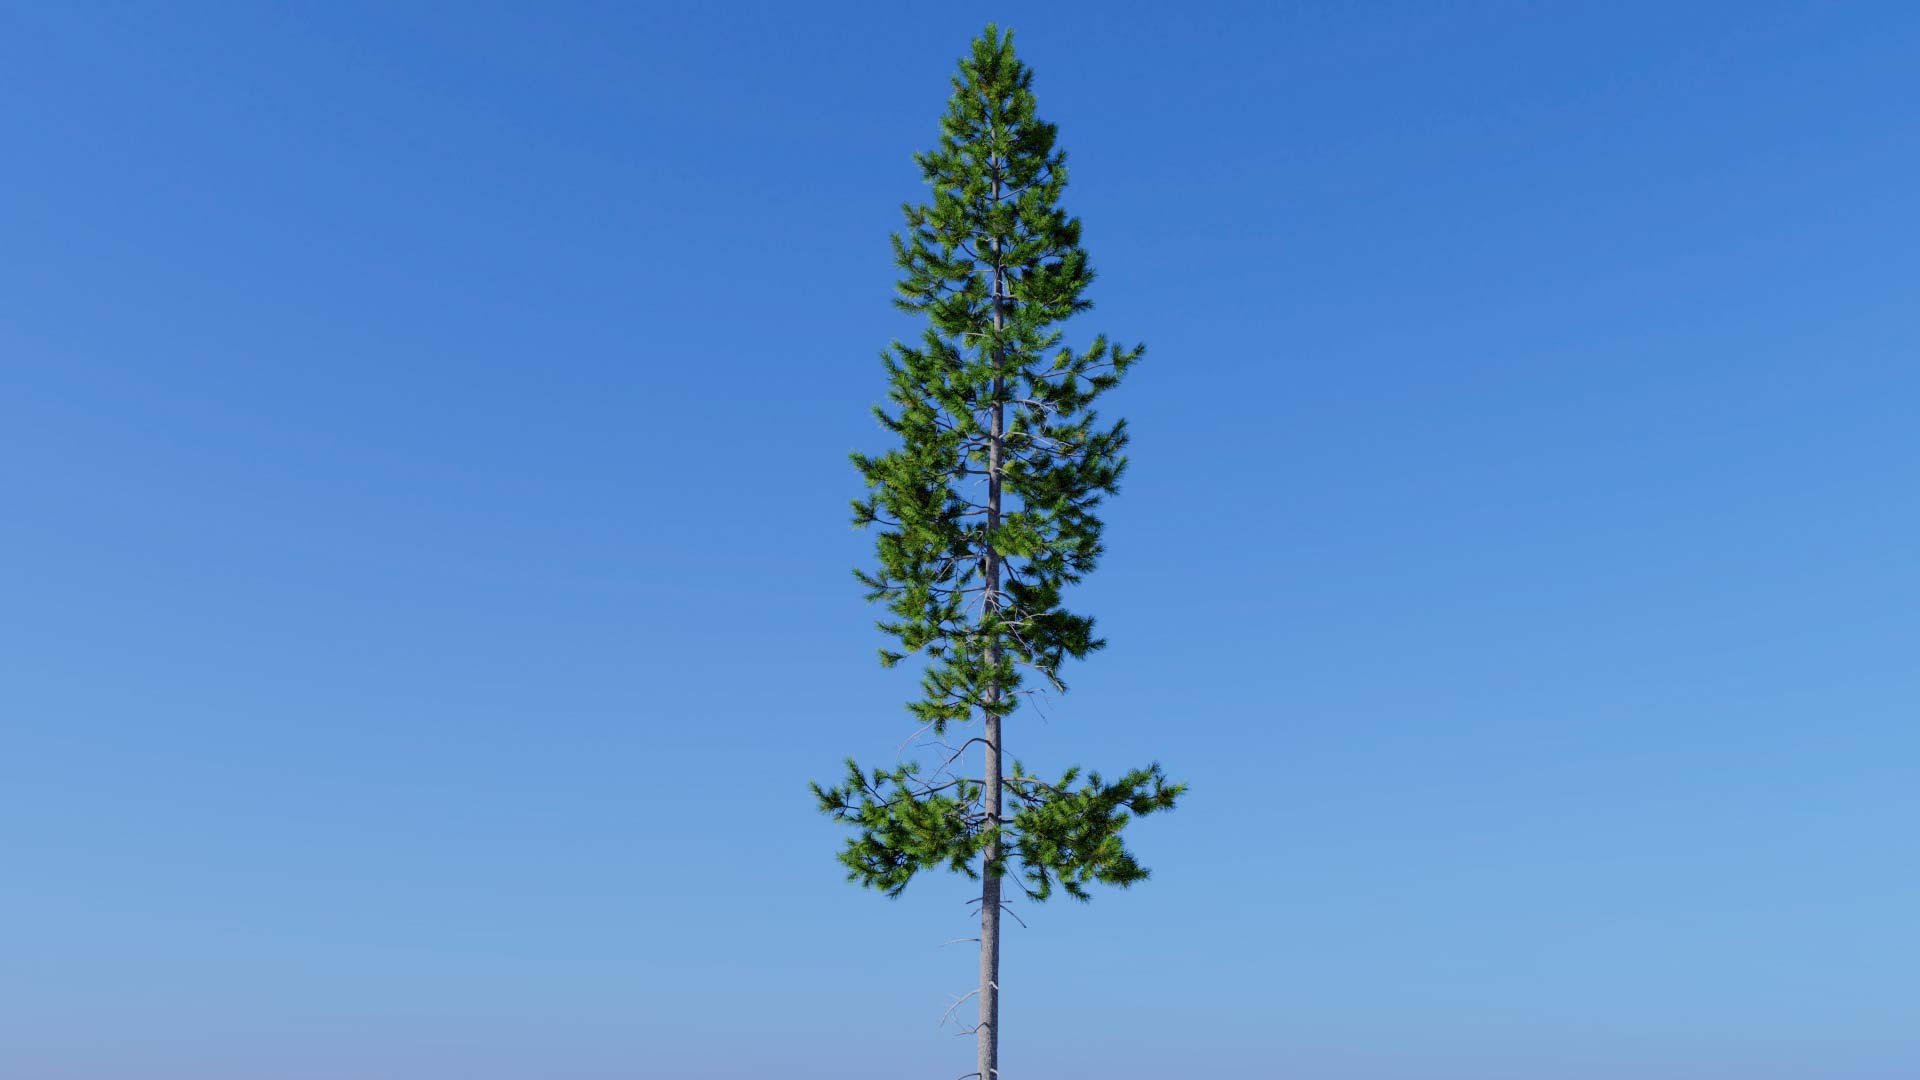 3D model of the Rocky Mountain lodgepole pine forest Pinus contorta var latifolia forest close-up